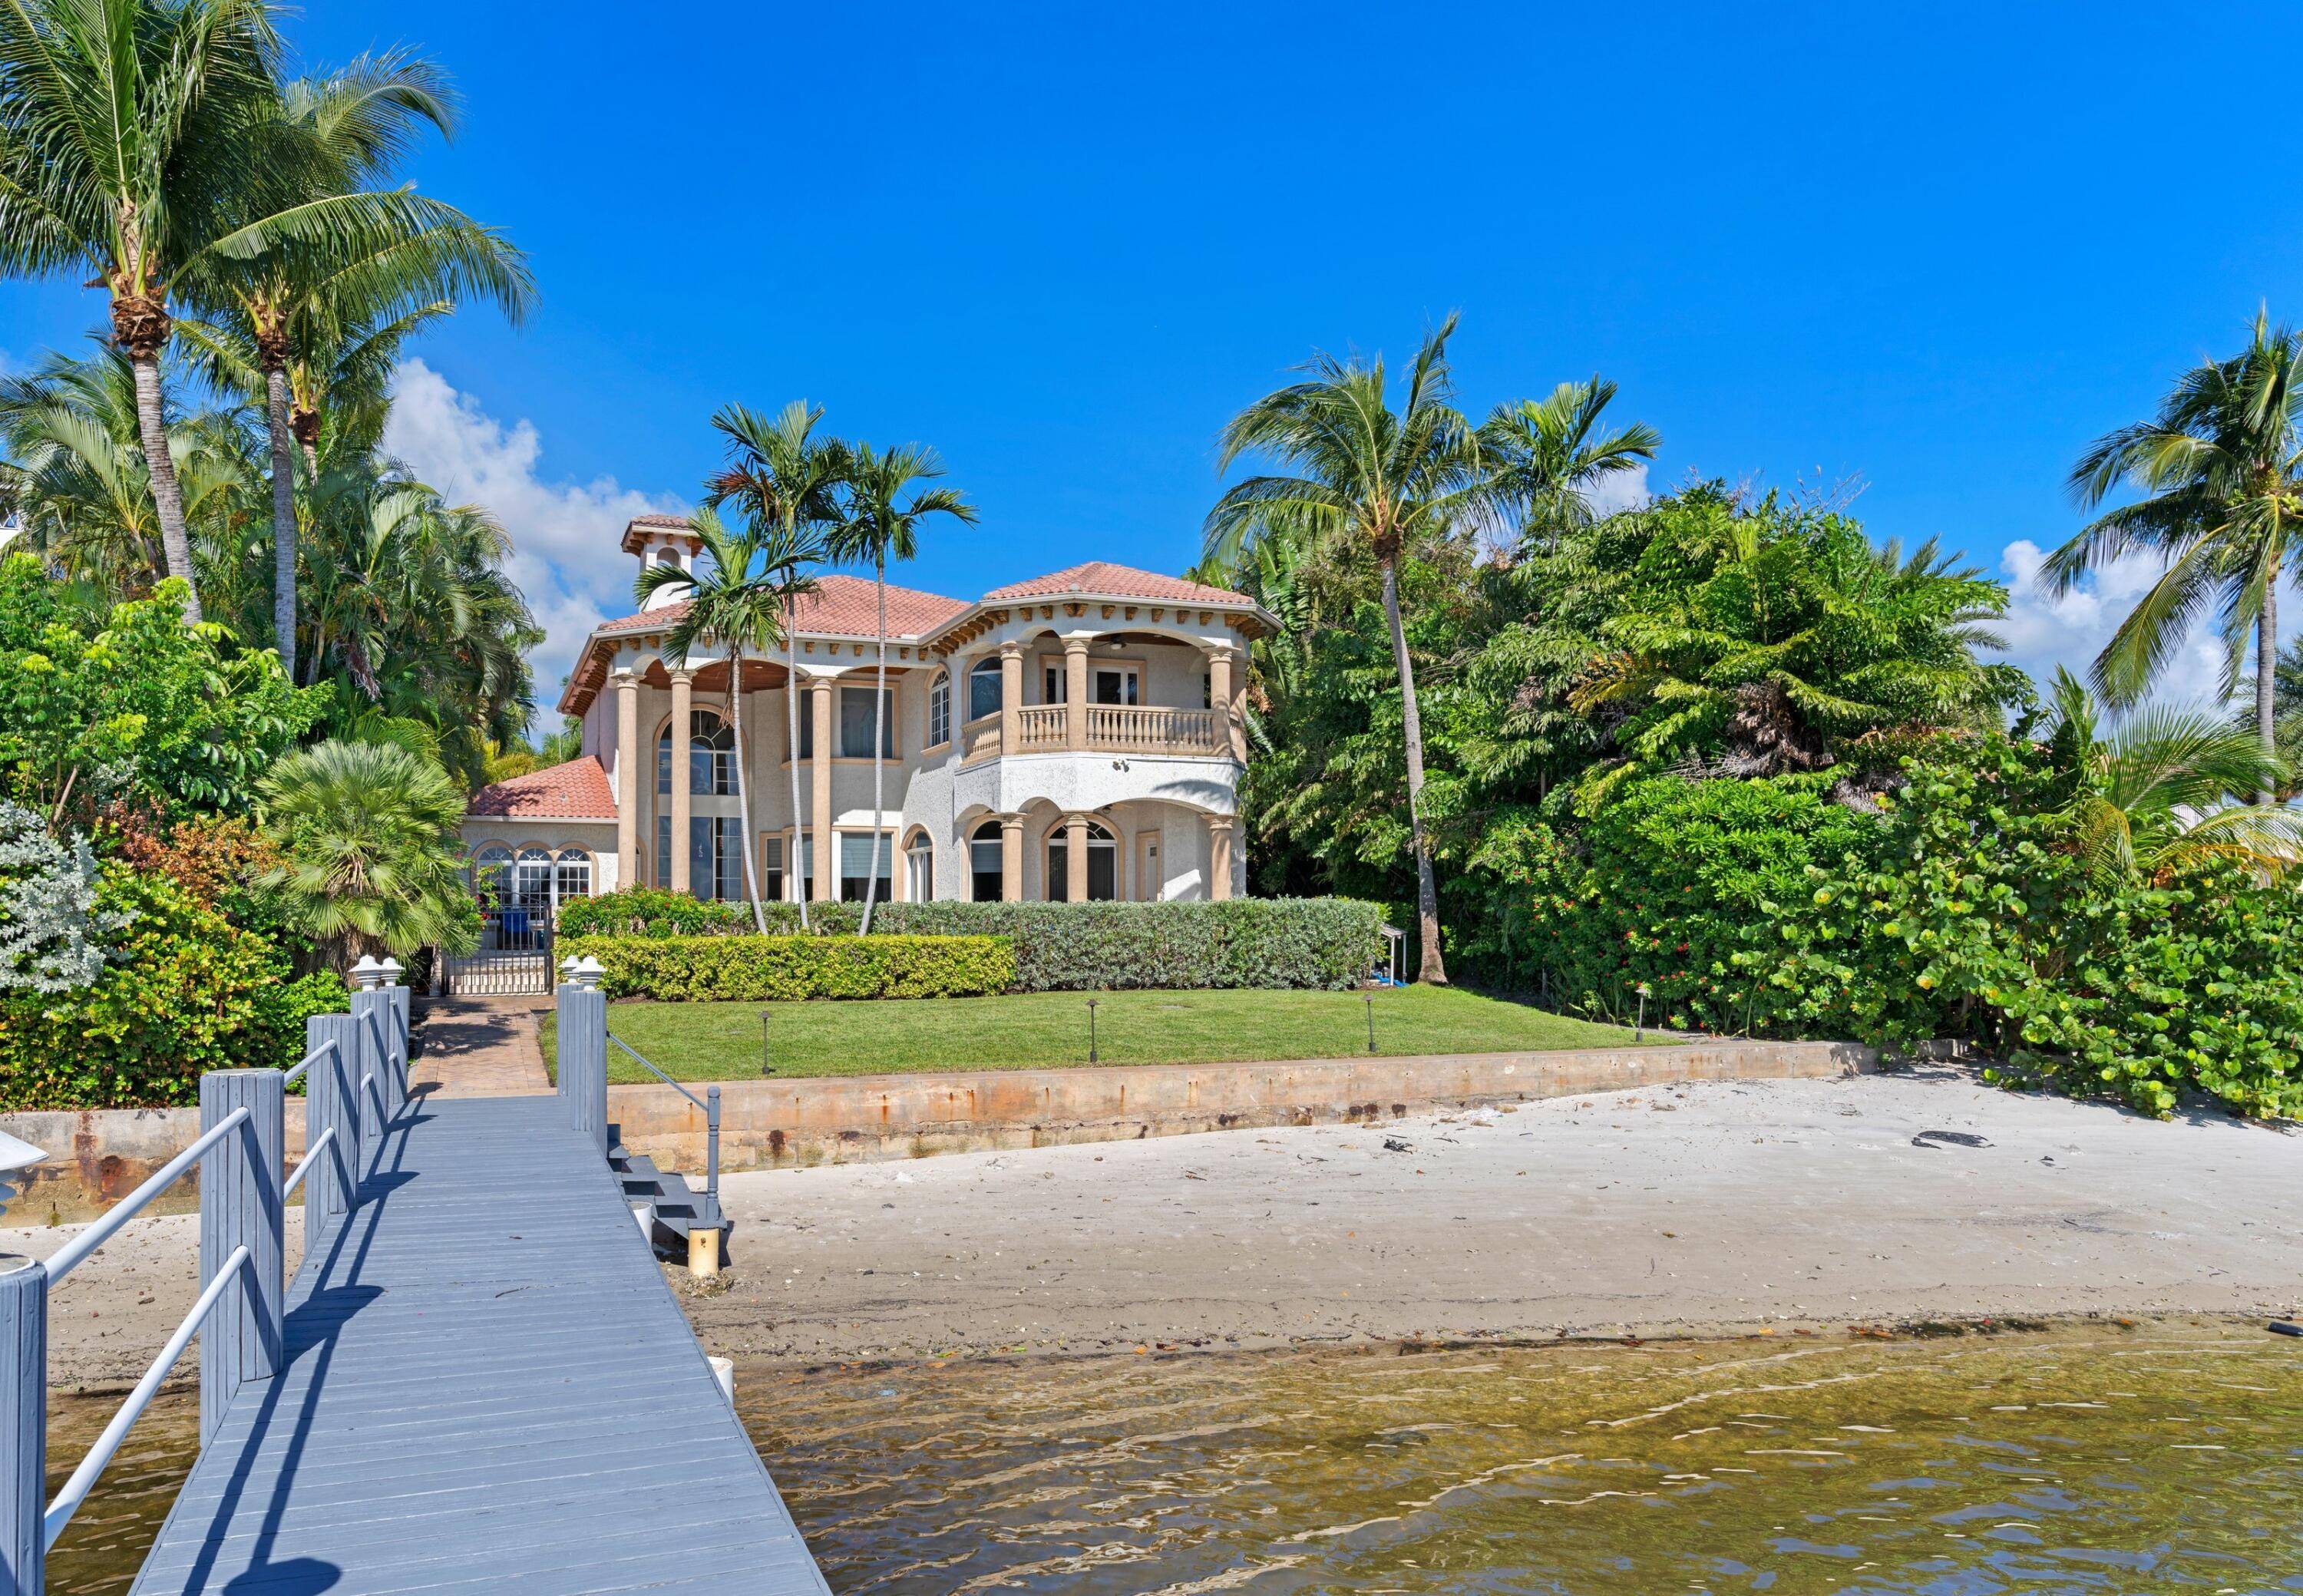 Direct Intracoastal Mediterranean style waterfront home with a private dock, and fabulous views.